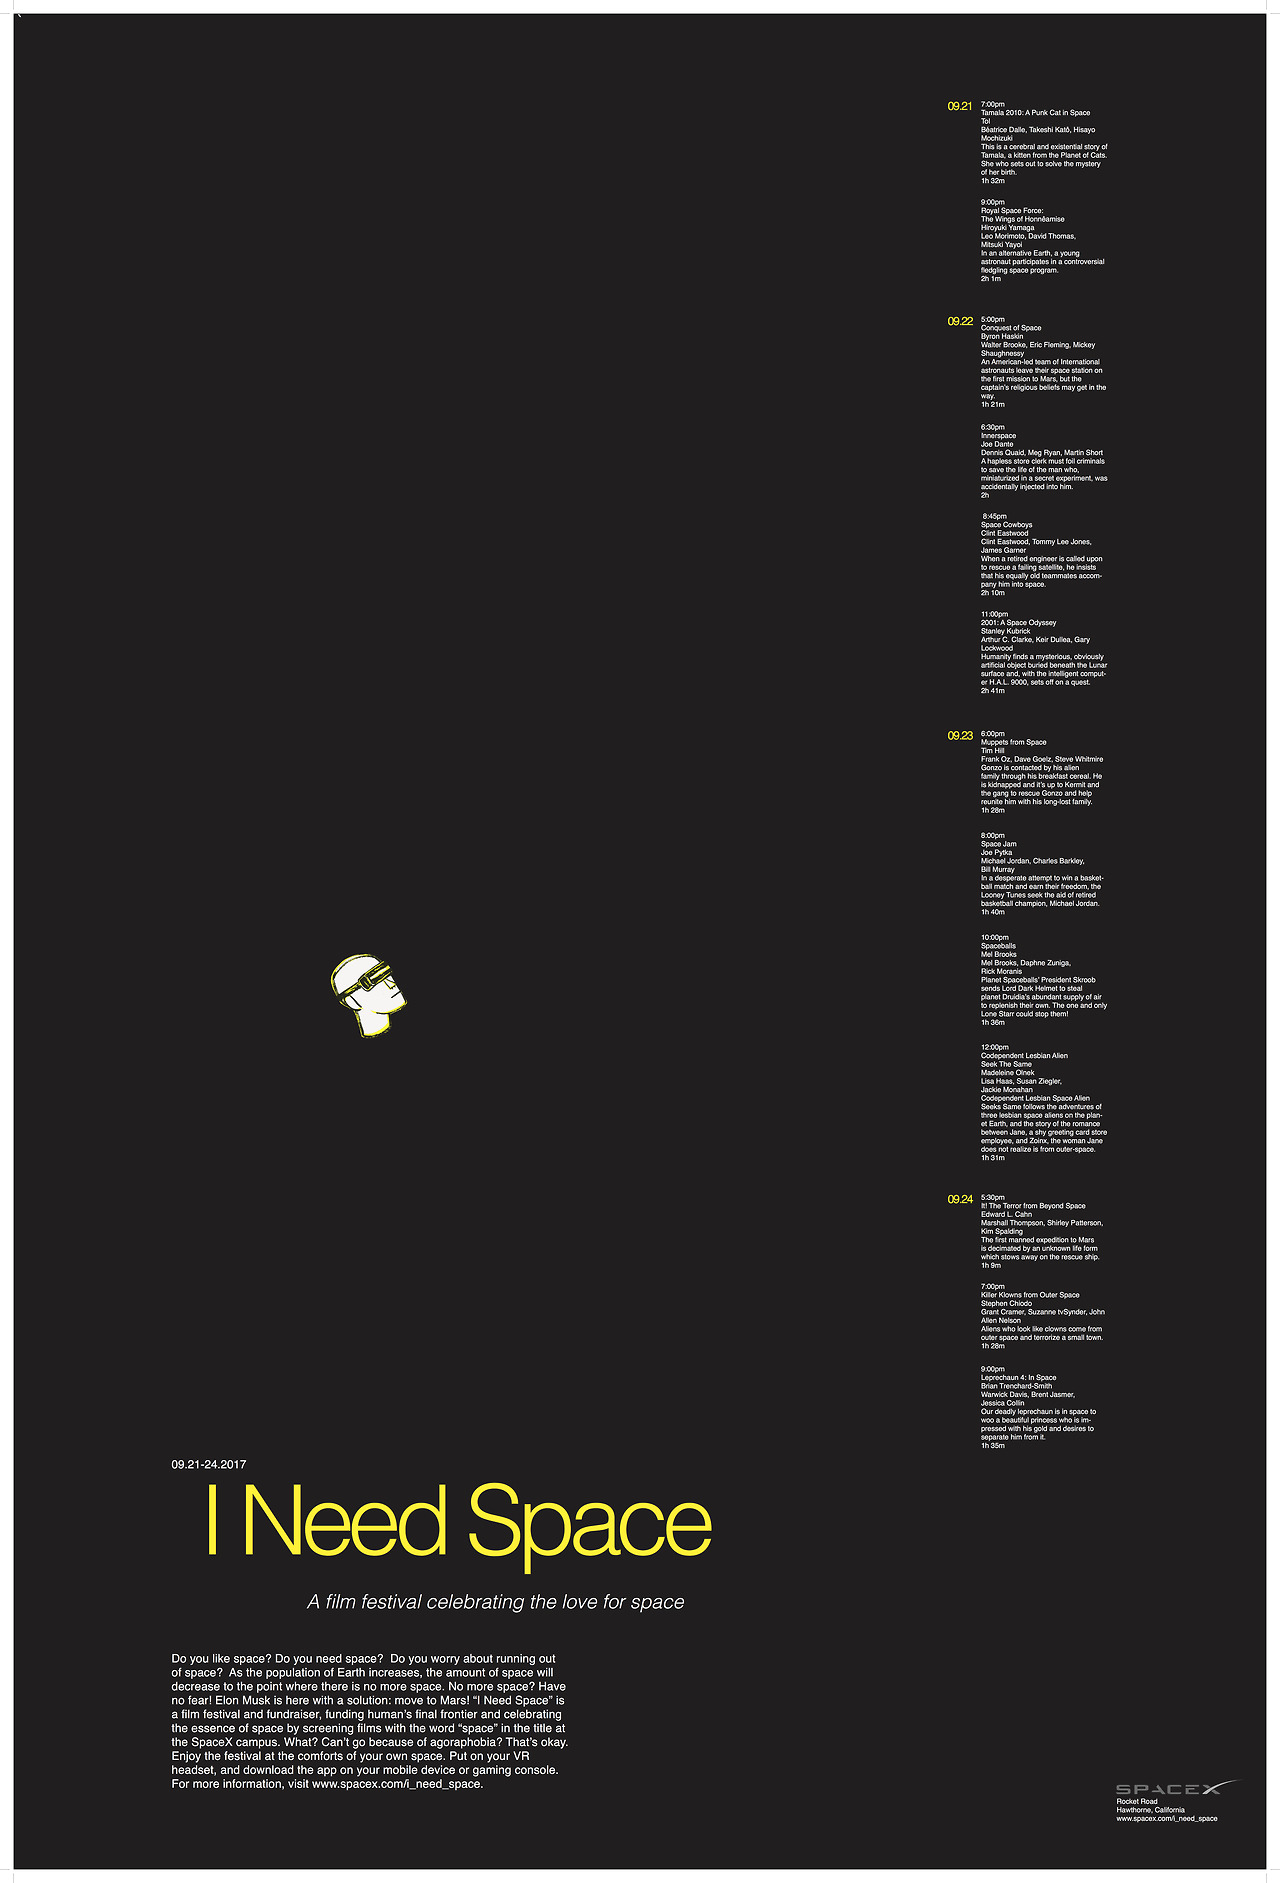  Space Film Festival 36” X 24” inches Laser print 2016  This poster is a fictitious film festival based one of the main principles of the modernist design: SPACE. All films are all about space and has the word “space” in the title with an option to v